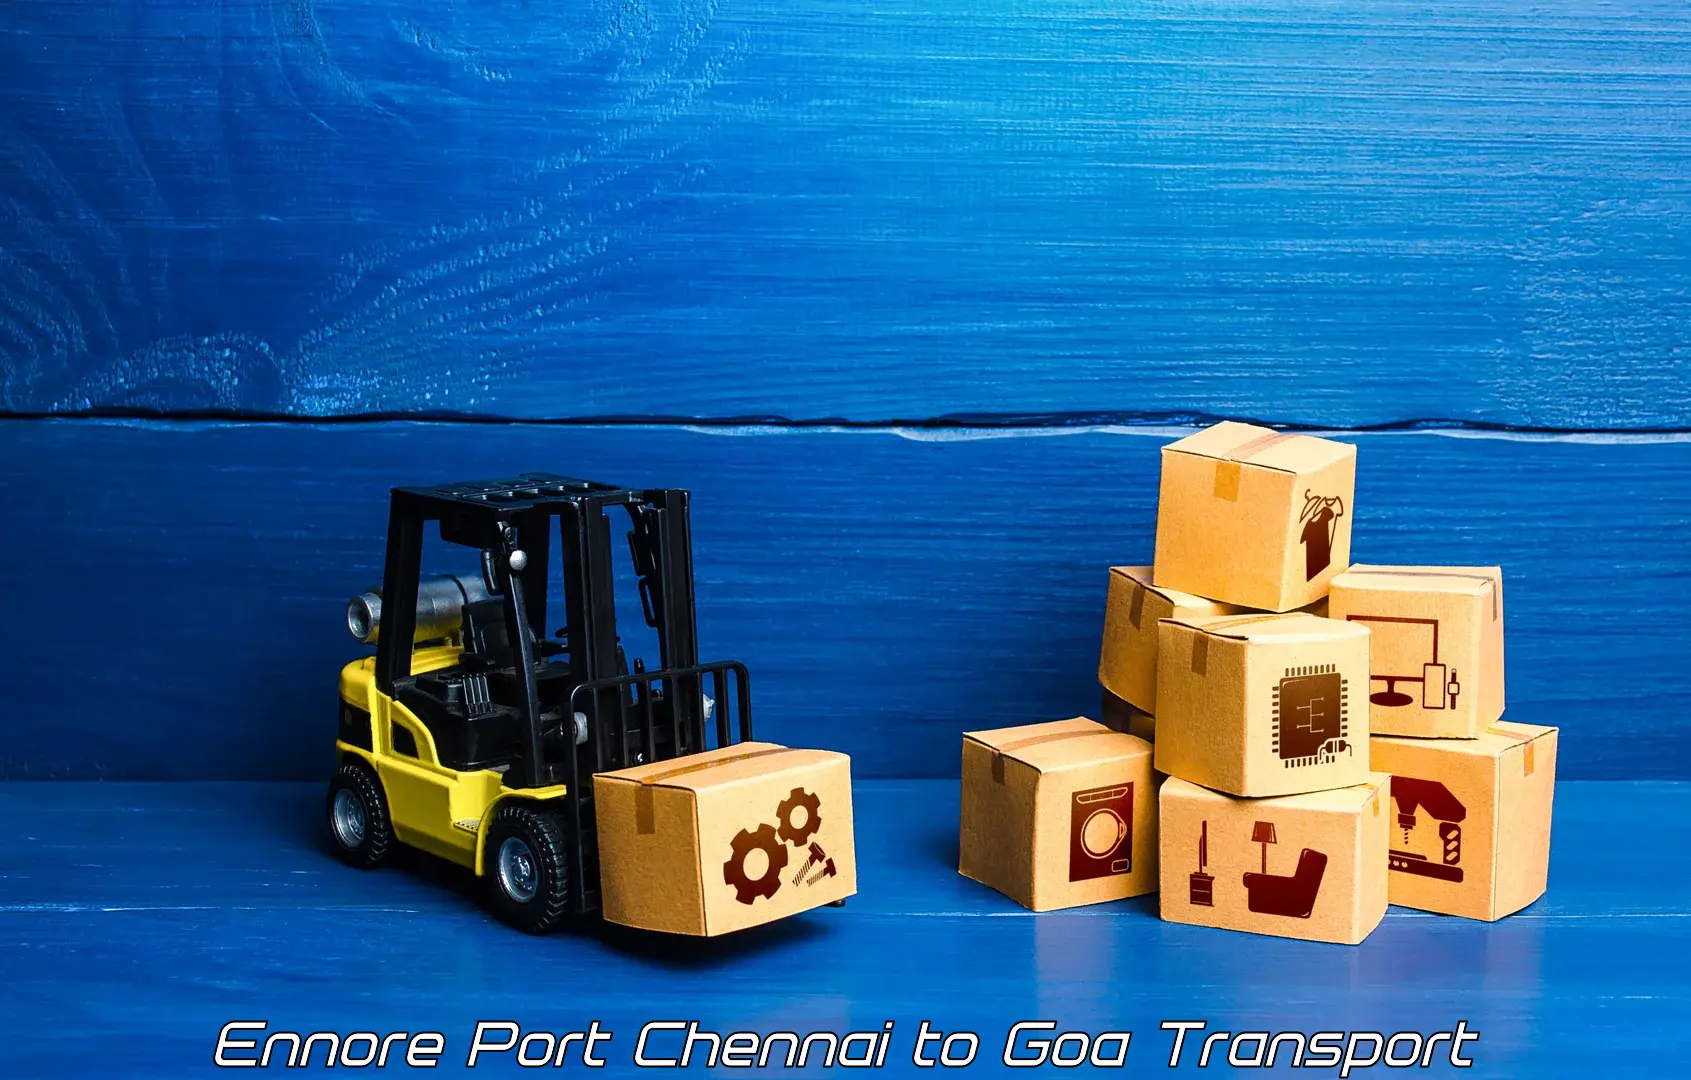 Container transport service Ennore Port Chennai to South Goa